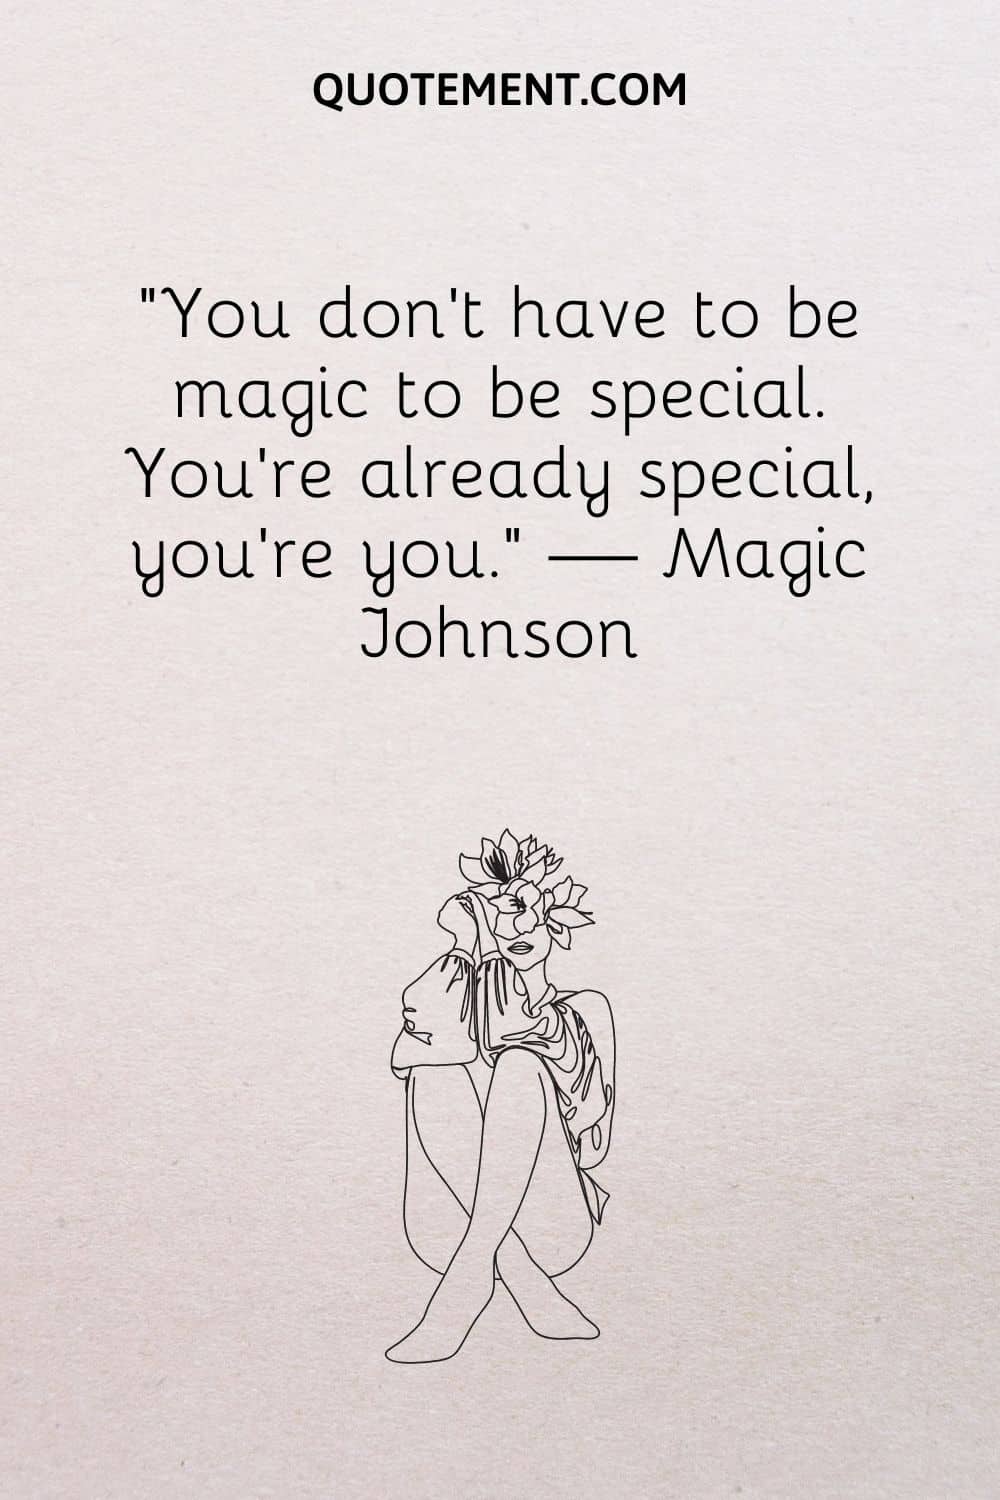 You don’t have to be magic to be special